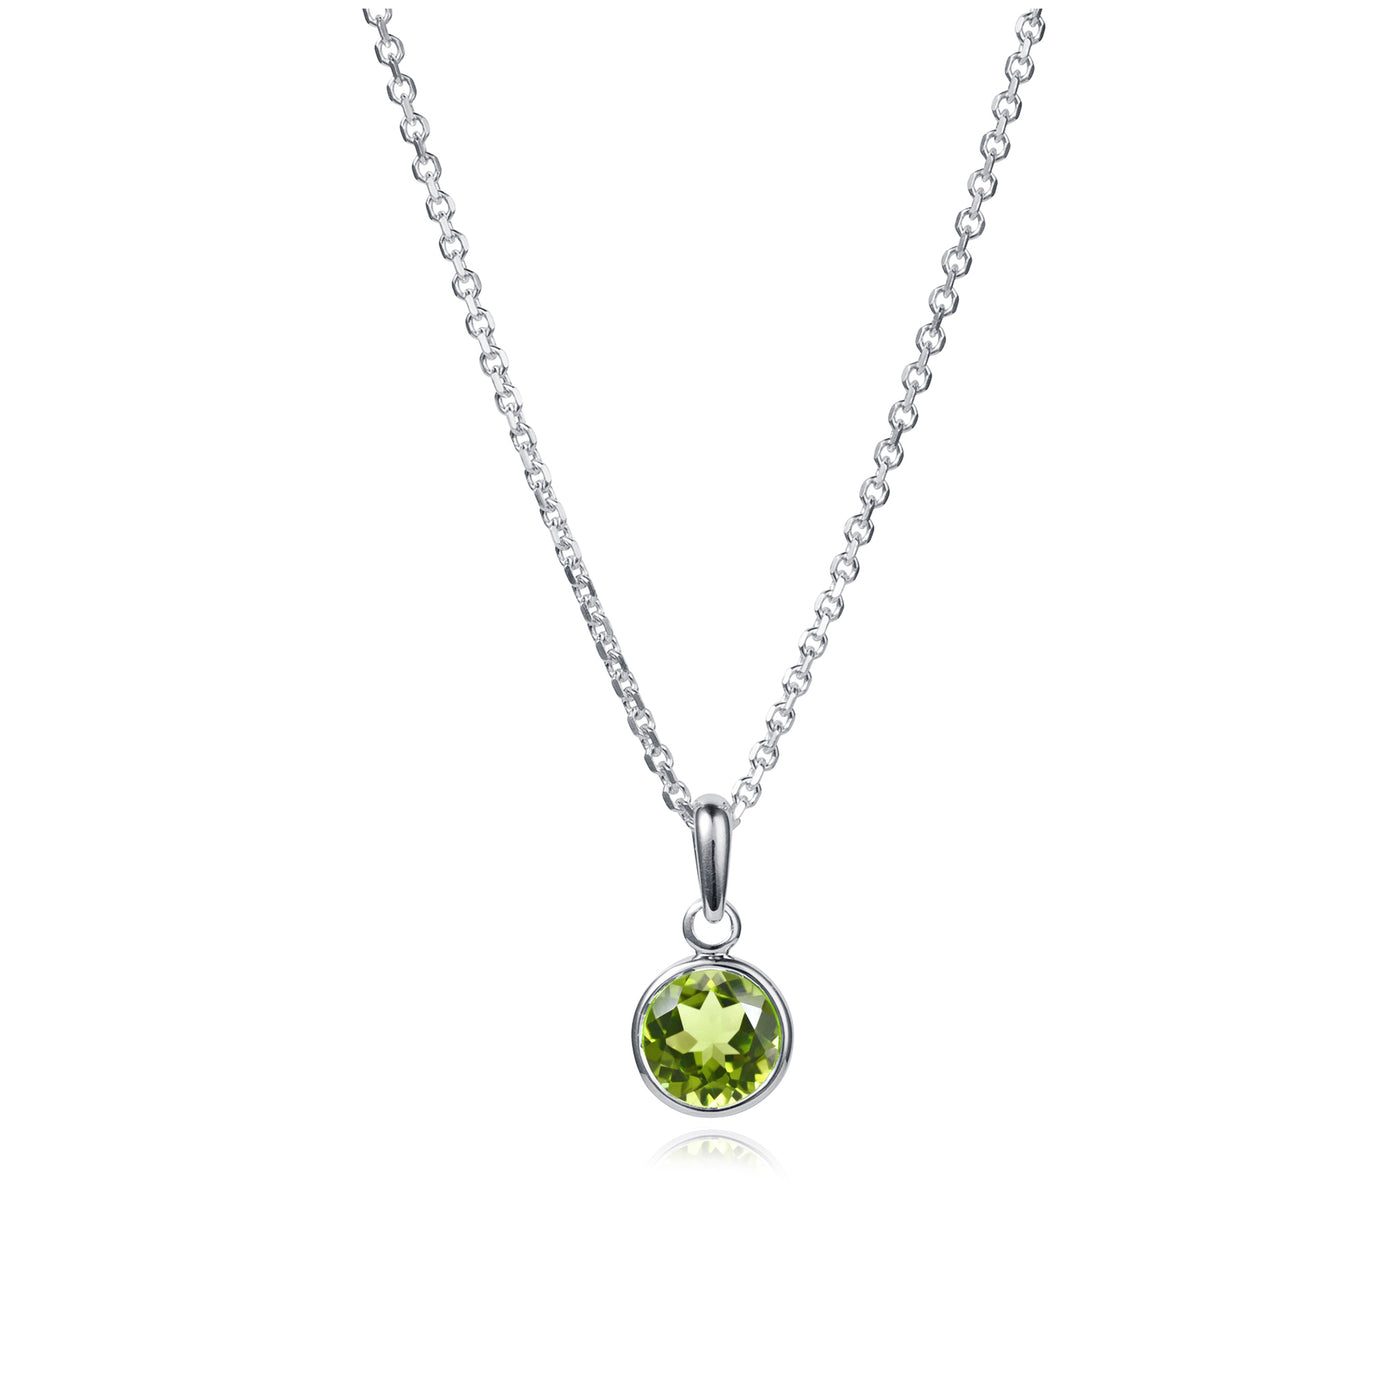 August Birthstone Necklace in Peridot and Silver